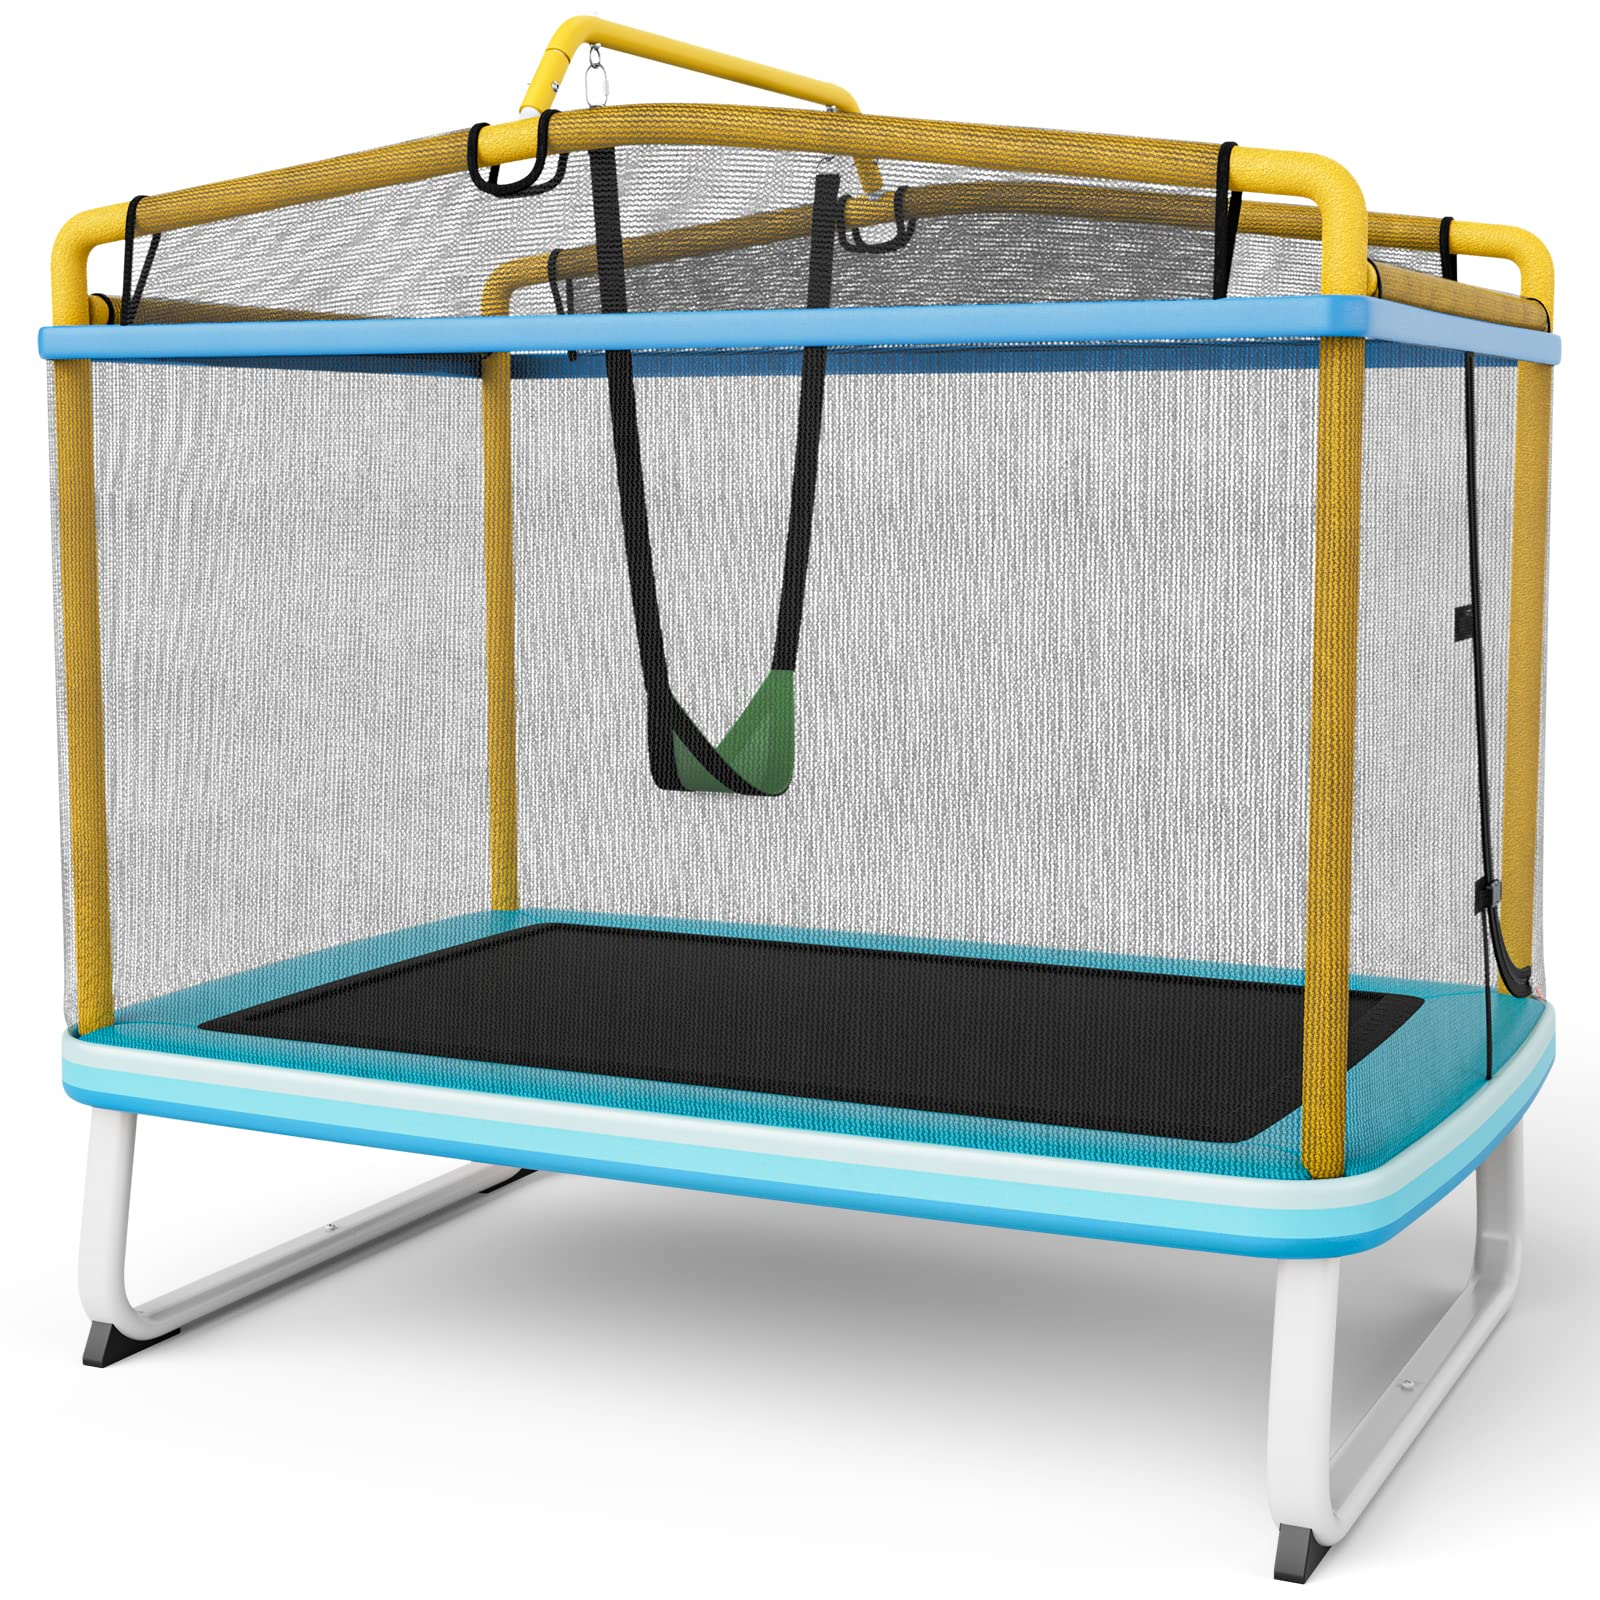 Giantex 6Ft Kids Trampoline with Swing and Horizontal Bar, ASTM Approved Small Trampoline with Net